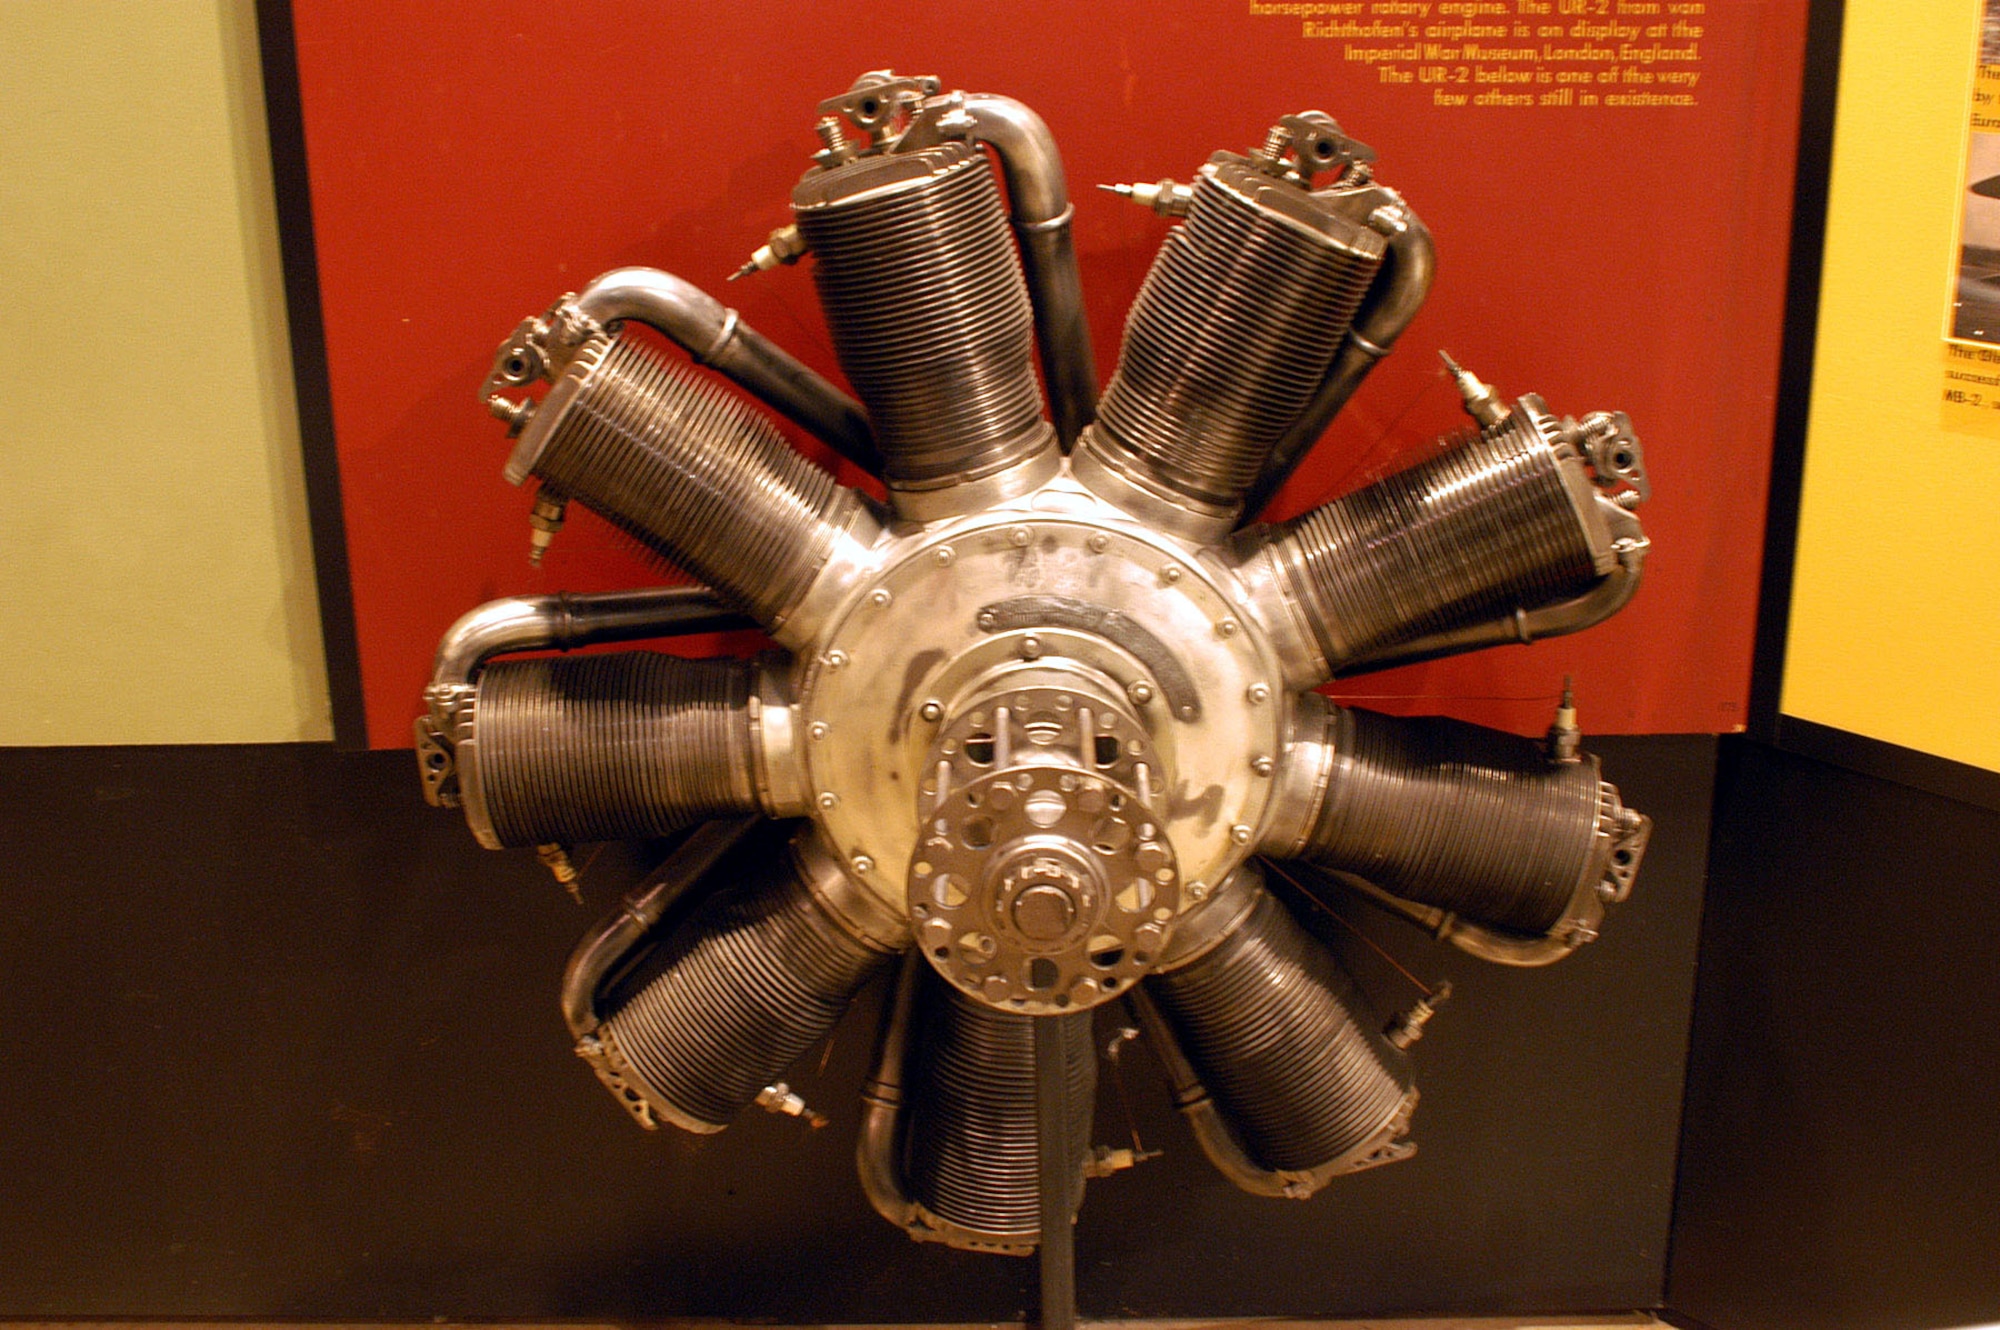 DAYTON, Ohio -- Oberursel UR-2 rotary engine on display in the Early Years Gallery at the National Museum of the United States Air Force. (U.S. Air Force photo)